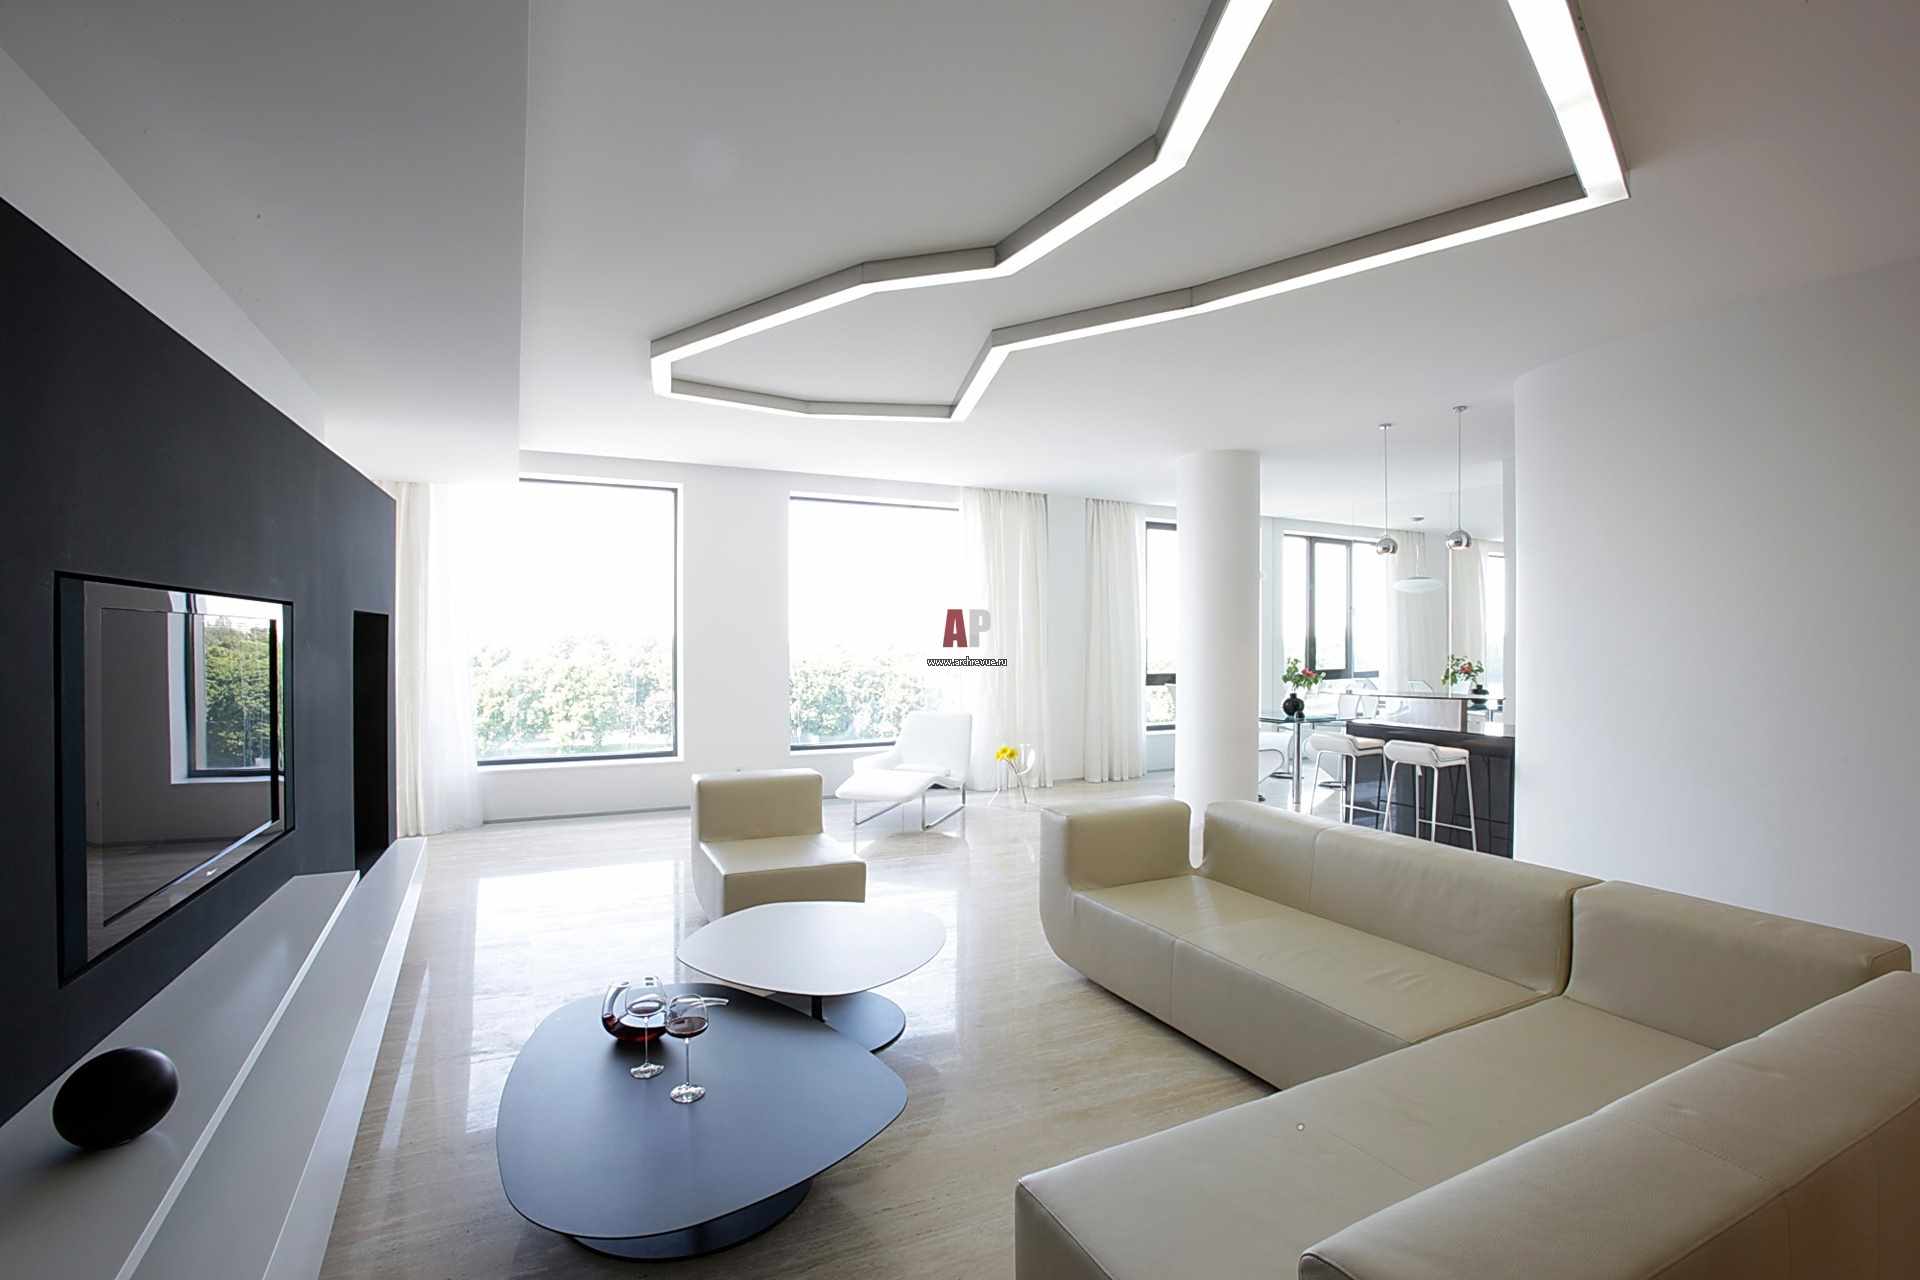 an example of using an unusual design of a living room in the style of minimalism